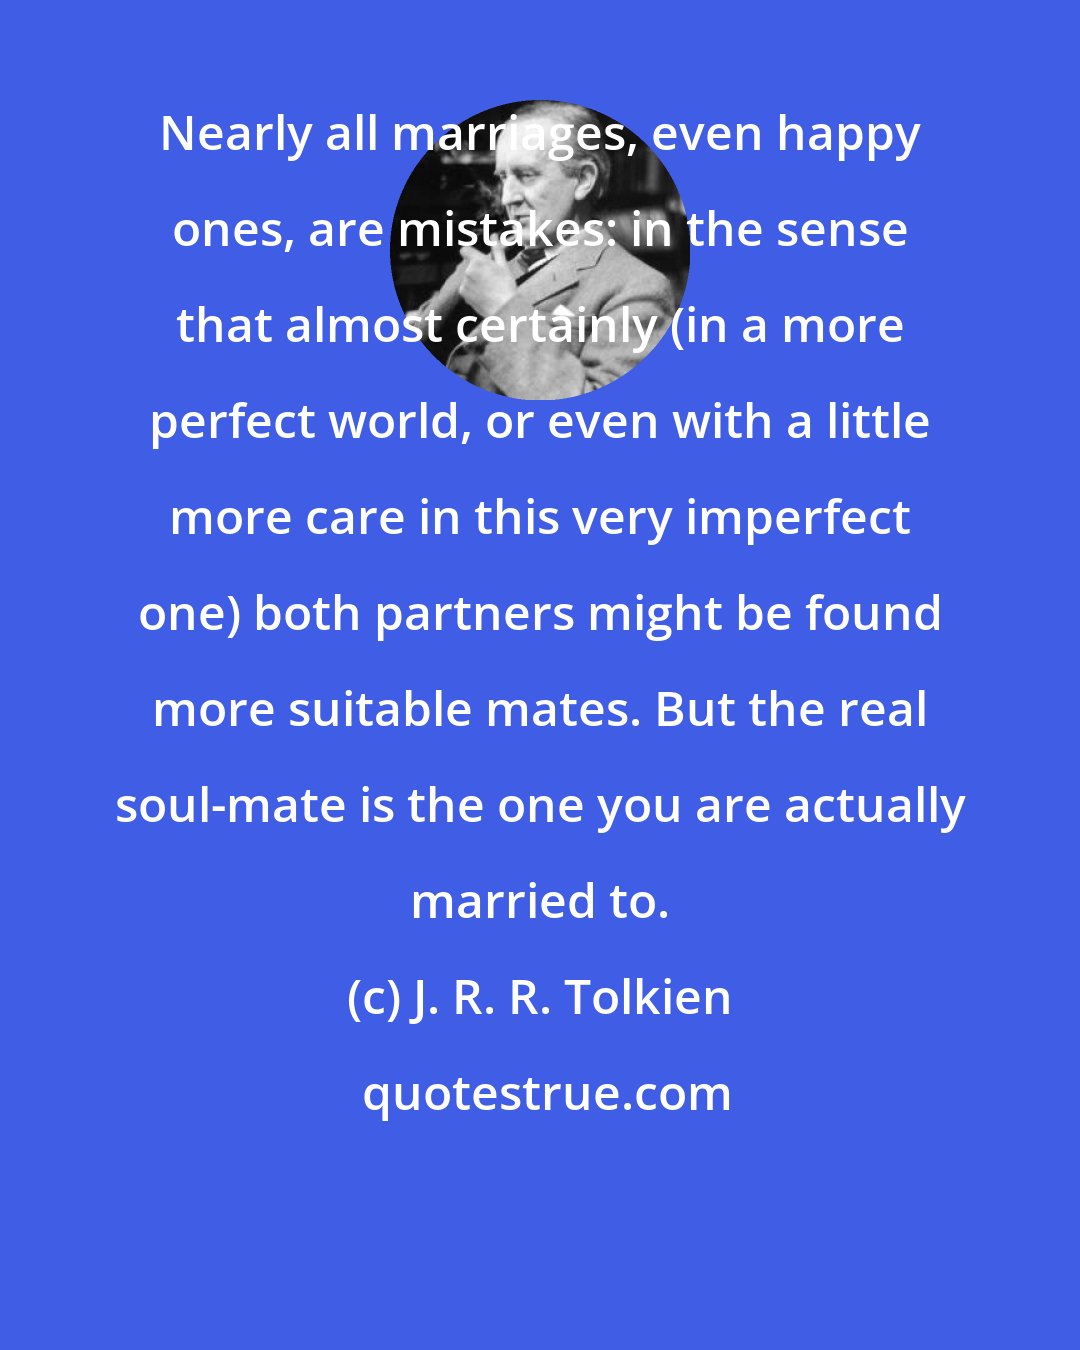 J. R. R. Tolkien: Nearly all marriages, even happy ones, are mistakes: in the sense that almost certainly (in a more perfect world, or even with a little more care in this very imperfect one) both partners might be found more suitable mates. But the real soul-mate is the one you are actually married to.